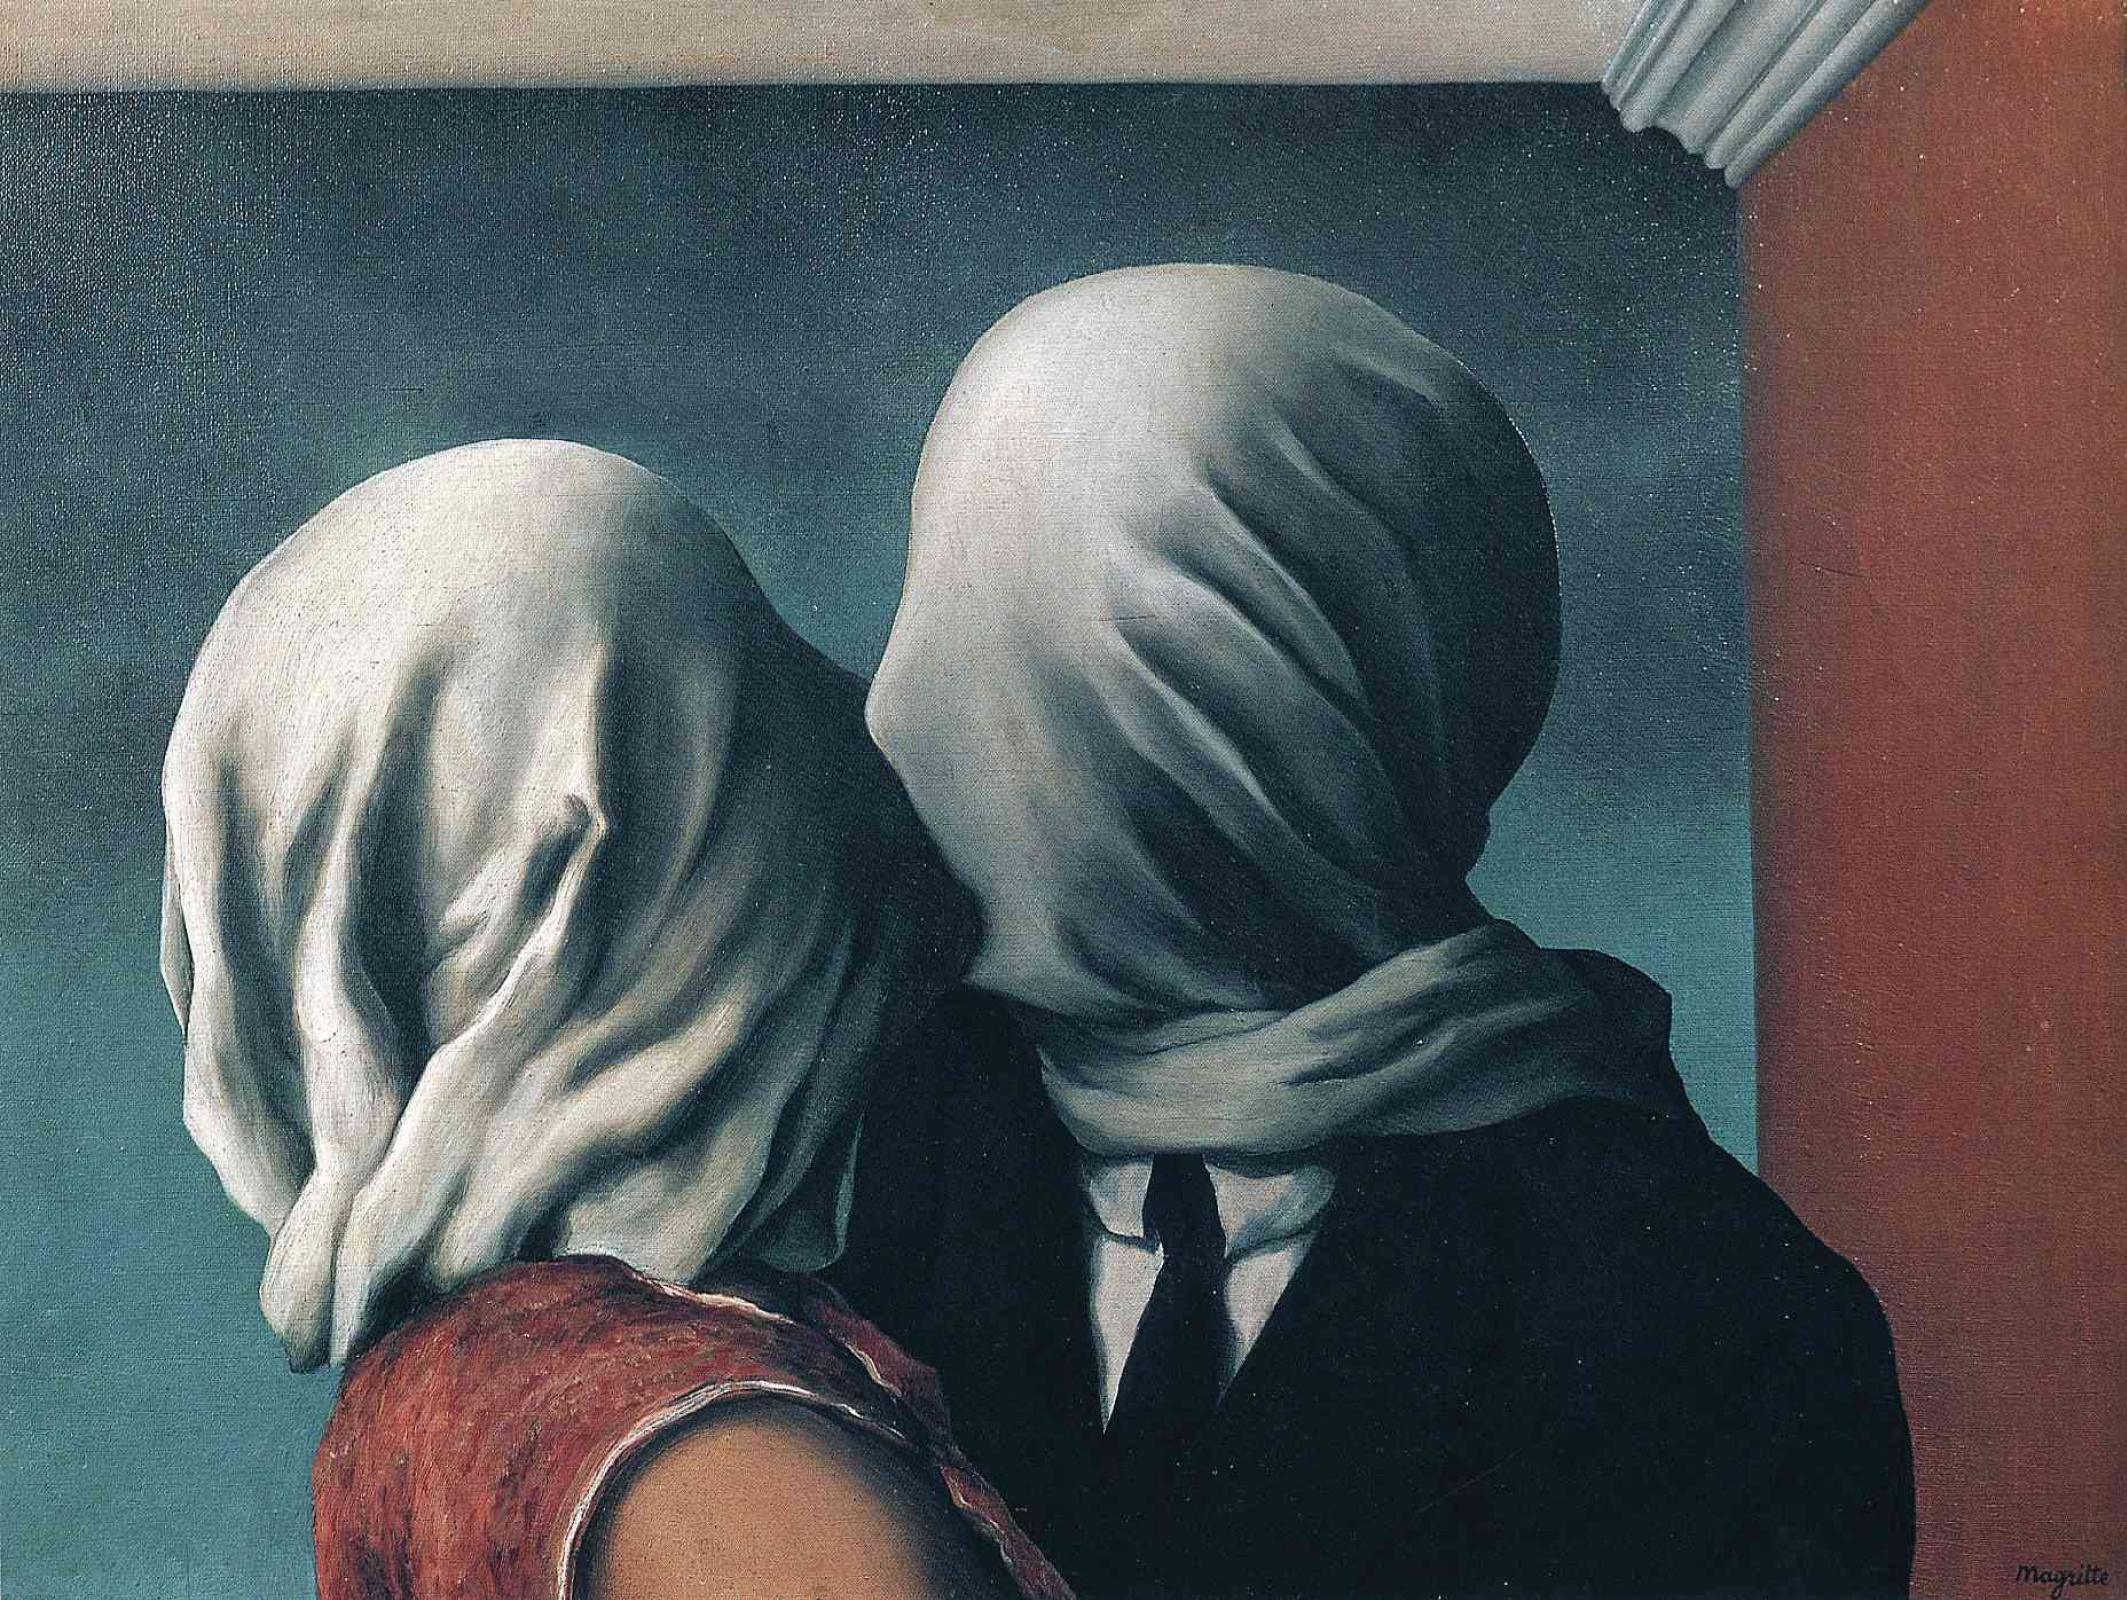 RENE MAGRITTE Surrealism Art Poster or Canvas Print "Time Transfixed" 